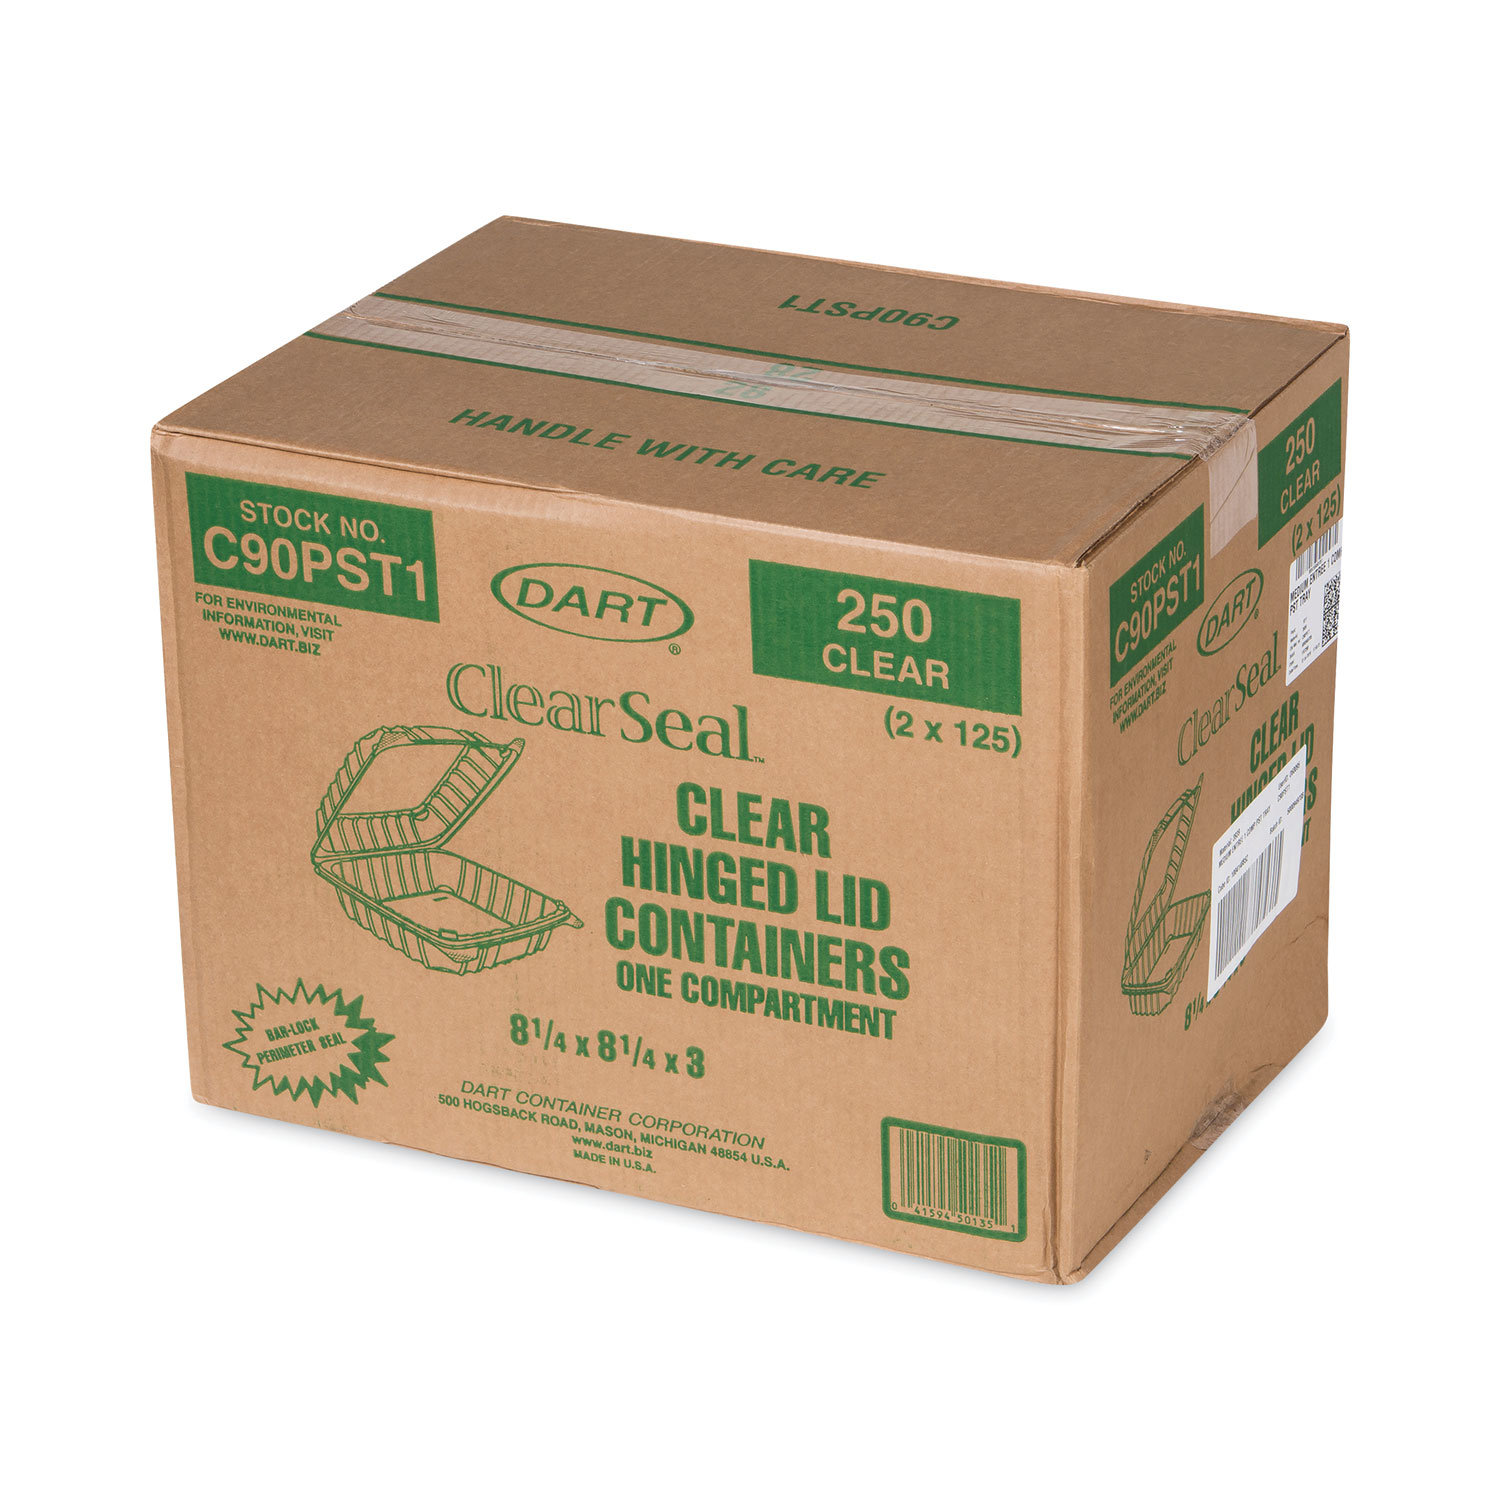 Plastic Clear Cylinder Container - 3-3/8″ x 3-1/8″ - 115C